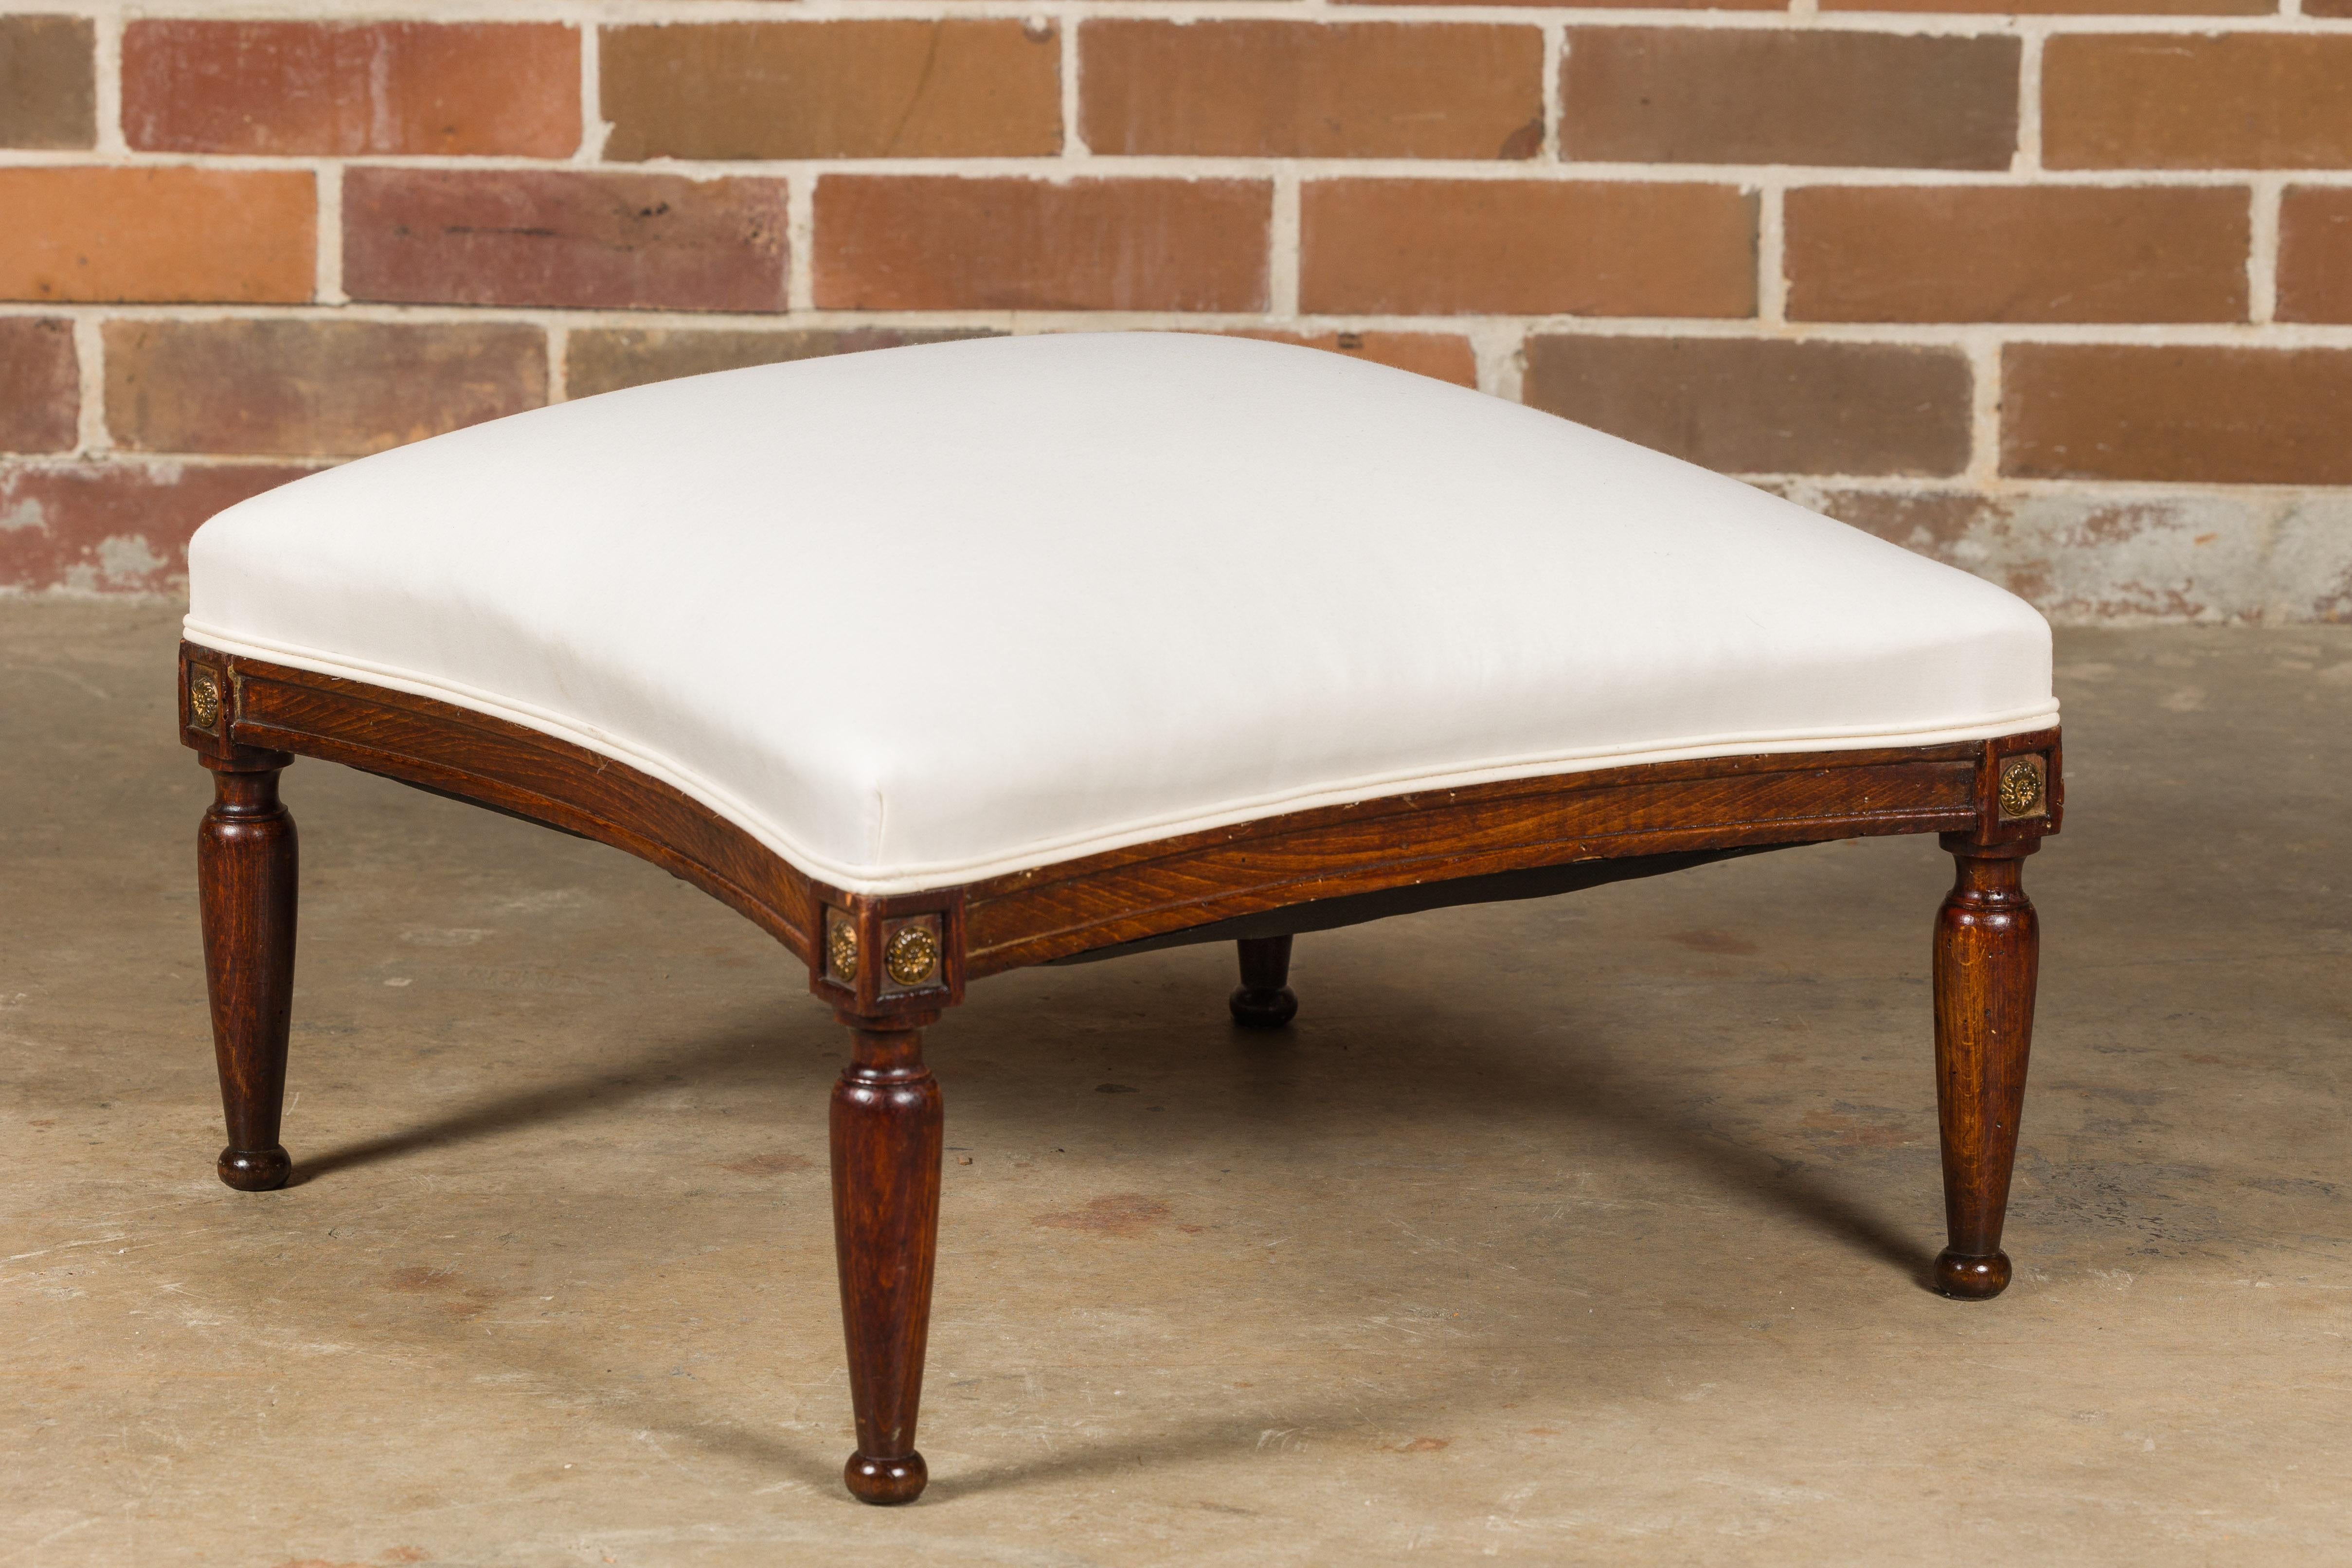 20th Century French Turn of the Century Ottoman with Giltwood Rosettes and Upholstery, 1900s For Sale